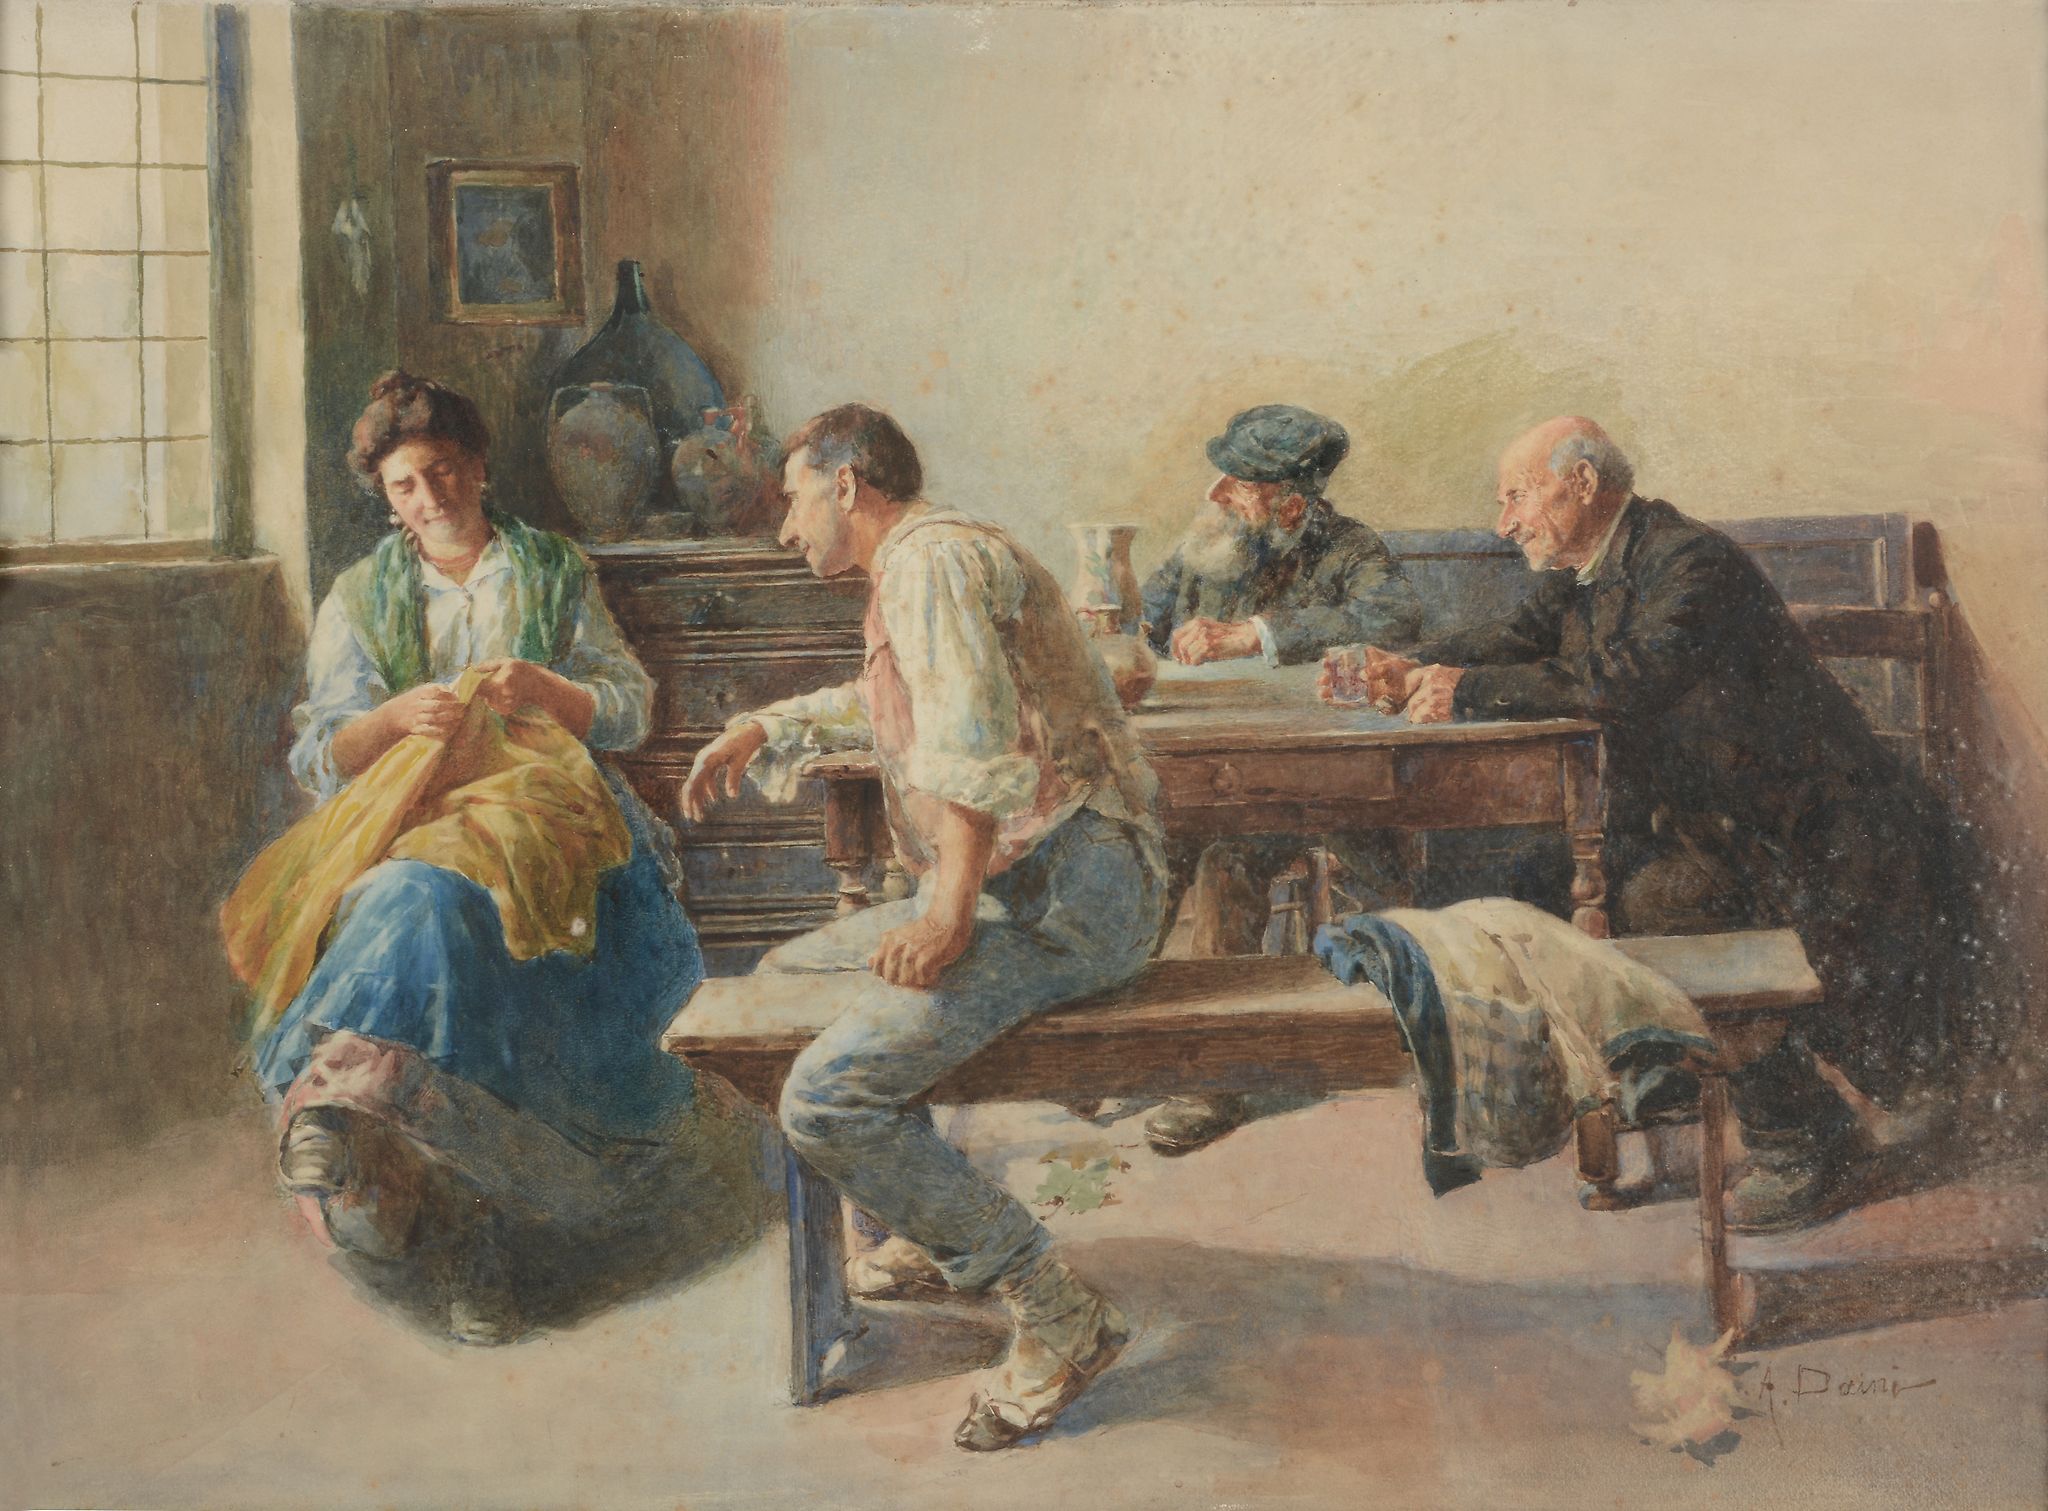 Augusto Daini (1860-1920) - Paying court to the seamstress Watercolour Signed lower right 54 x 74 cm